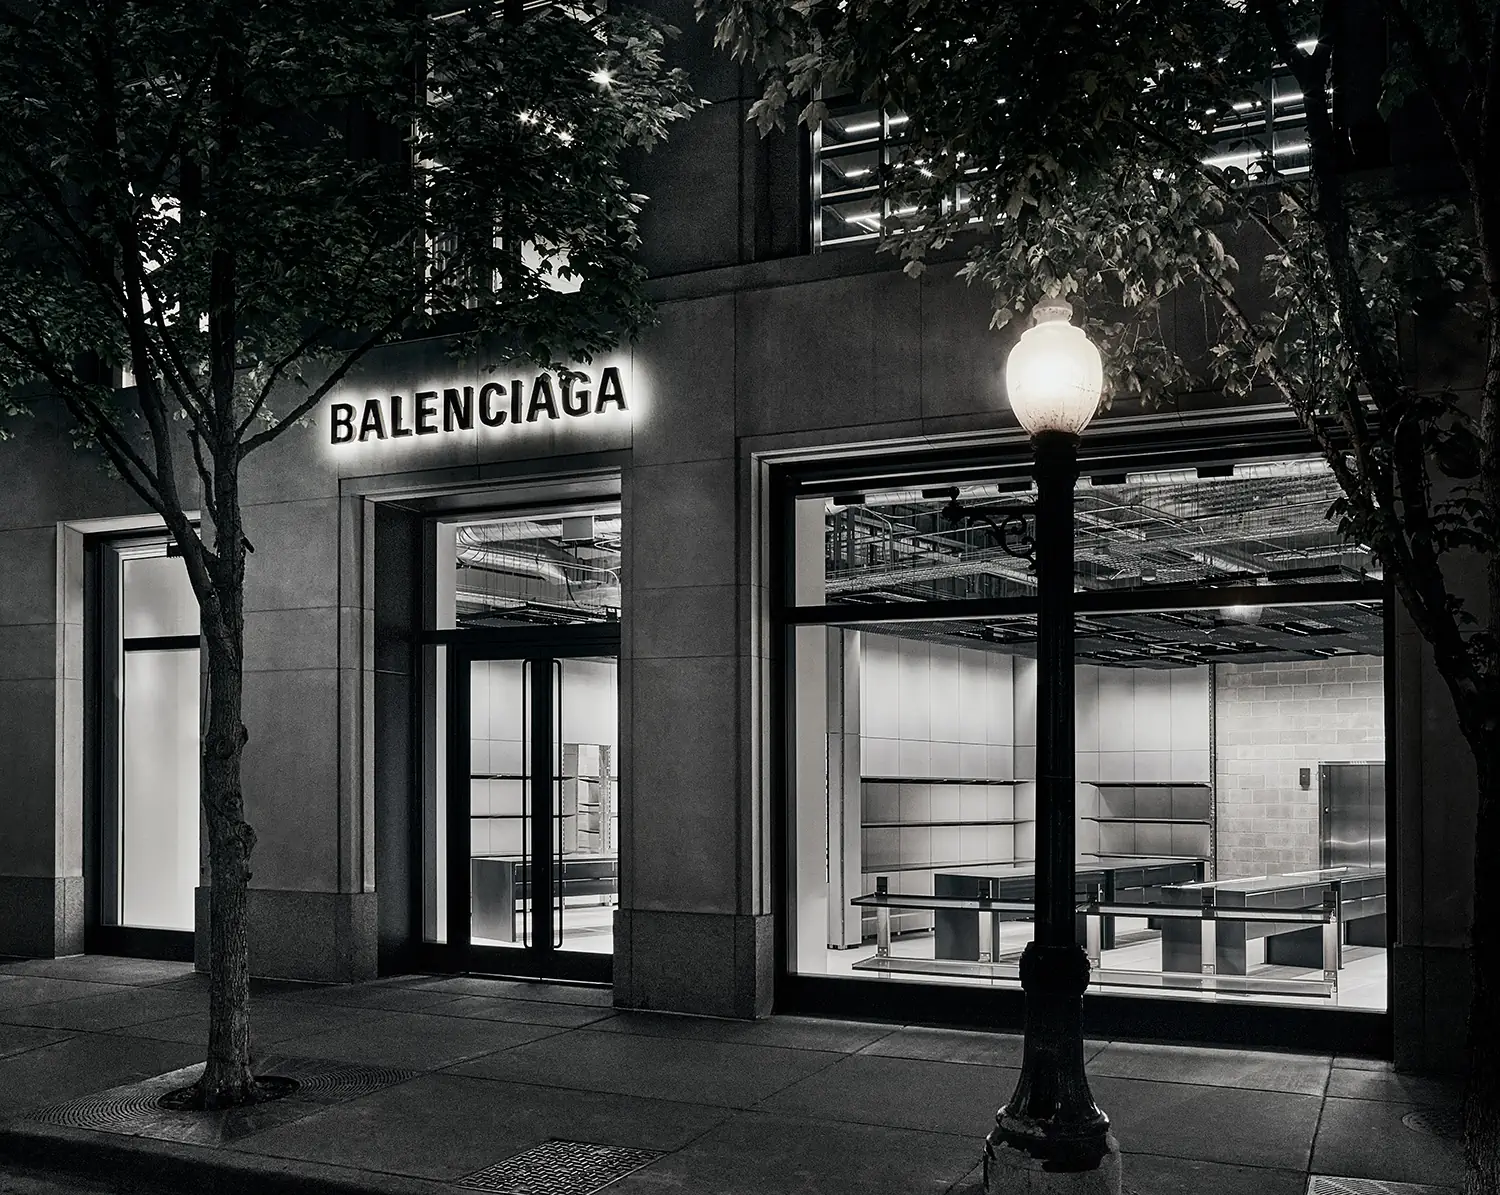 Balenciaga opens its first store in Chicago - fashionotography